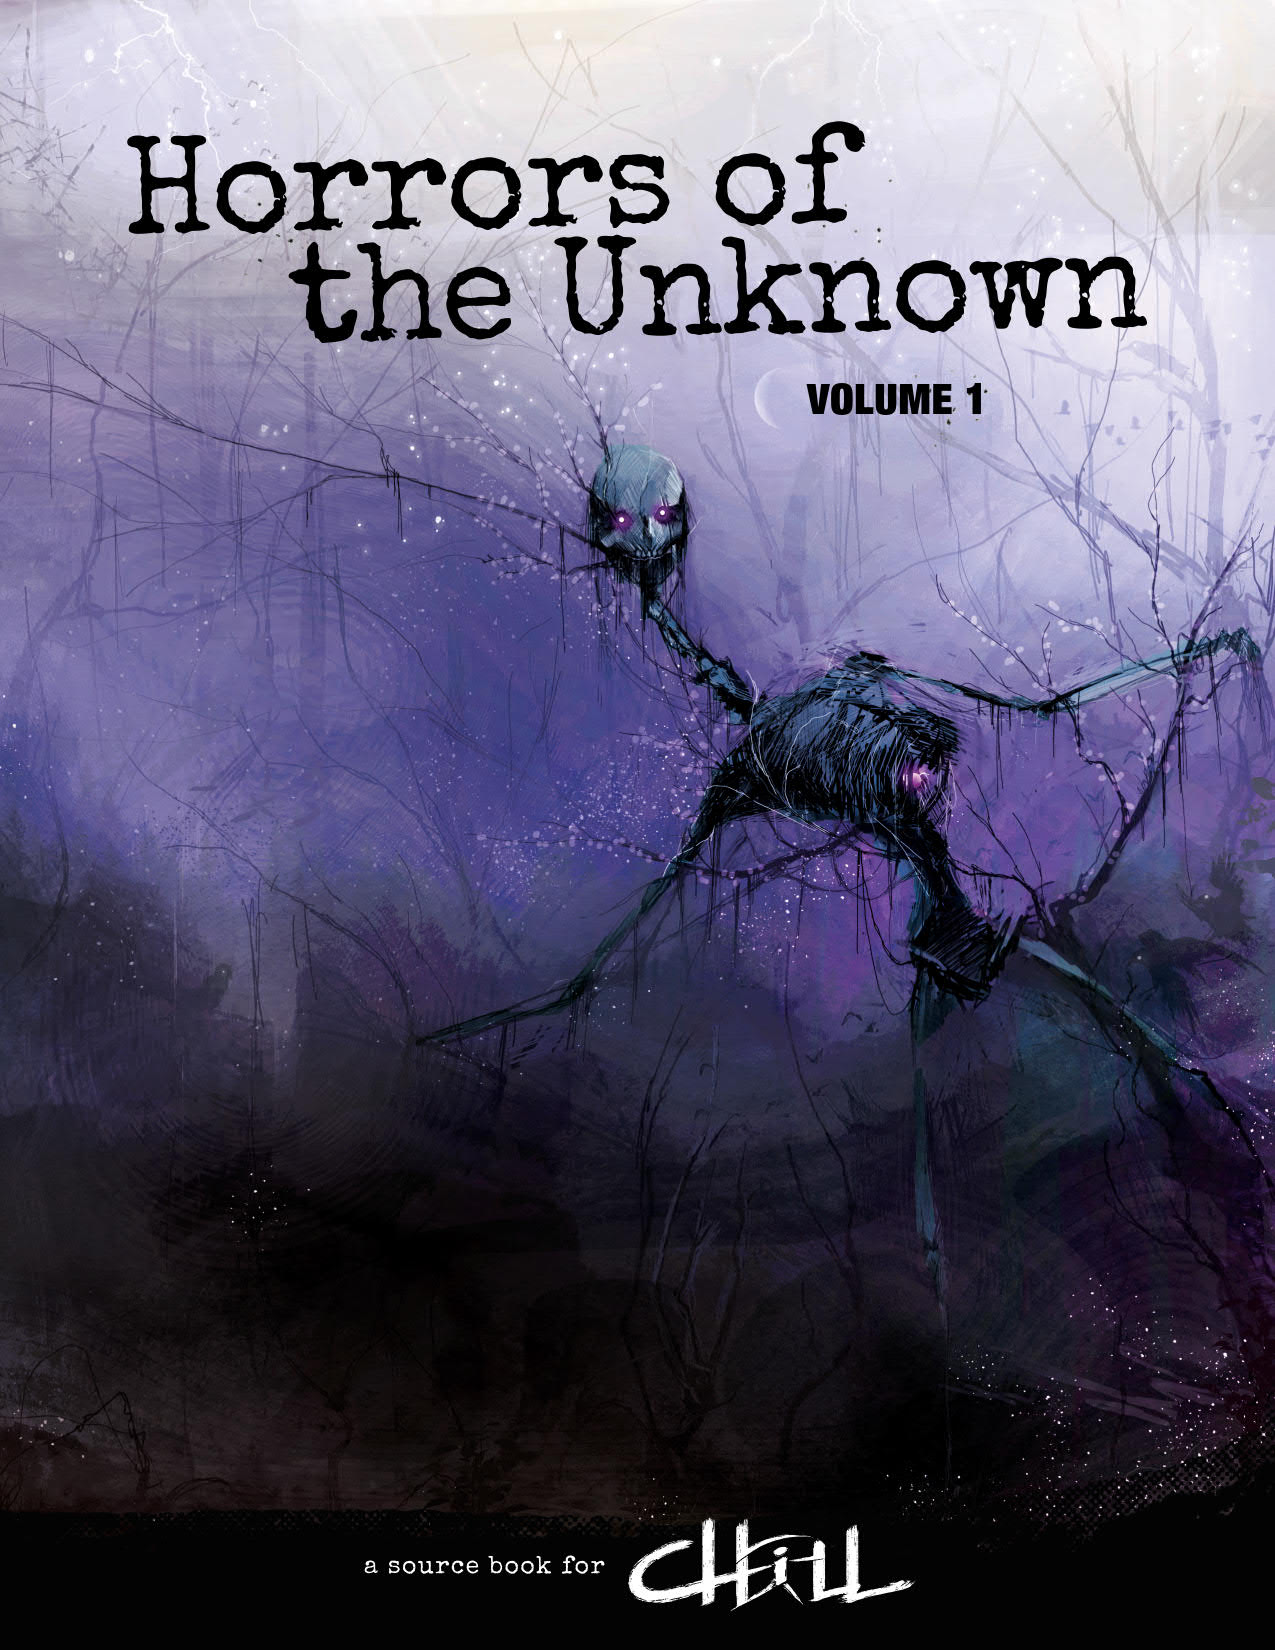 Horrors of the Unknown Volume 1 1.jpg